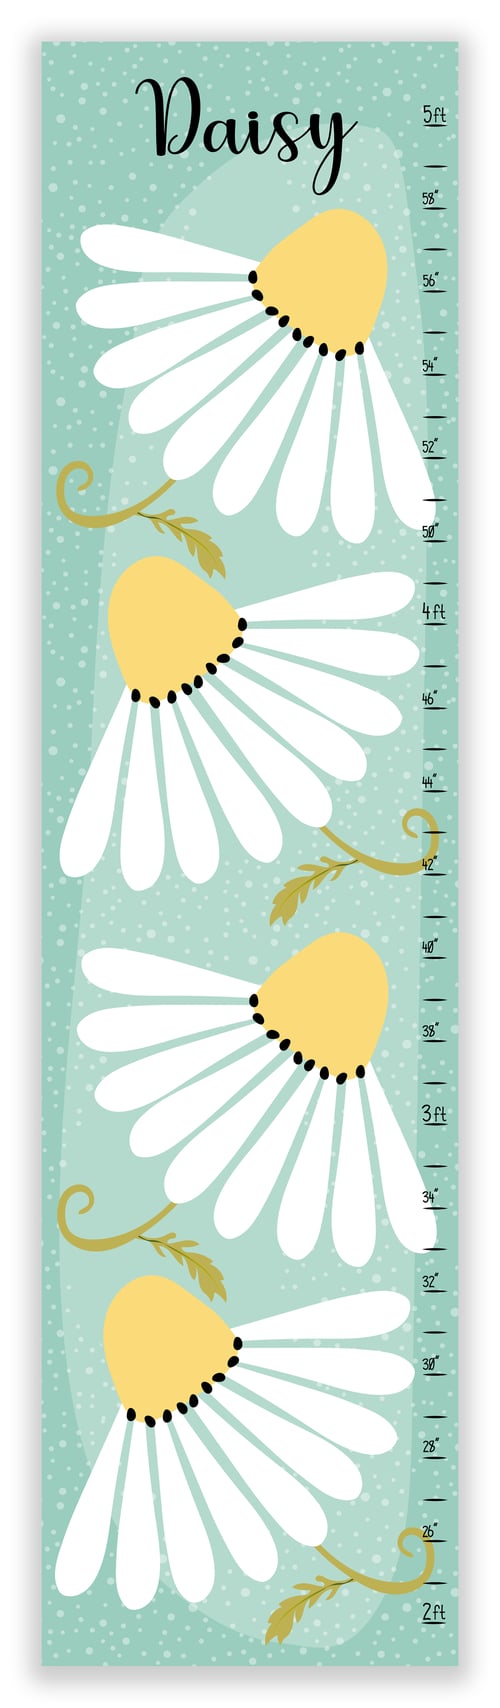 Image of Spring Daisy Personalized Canvas Growth Chart